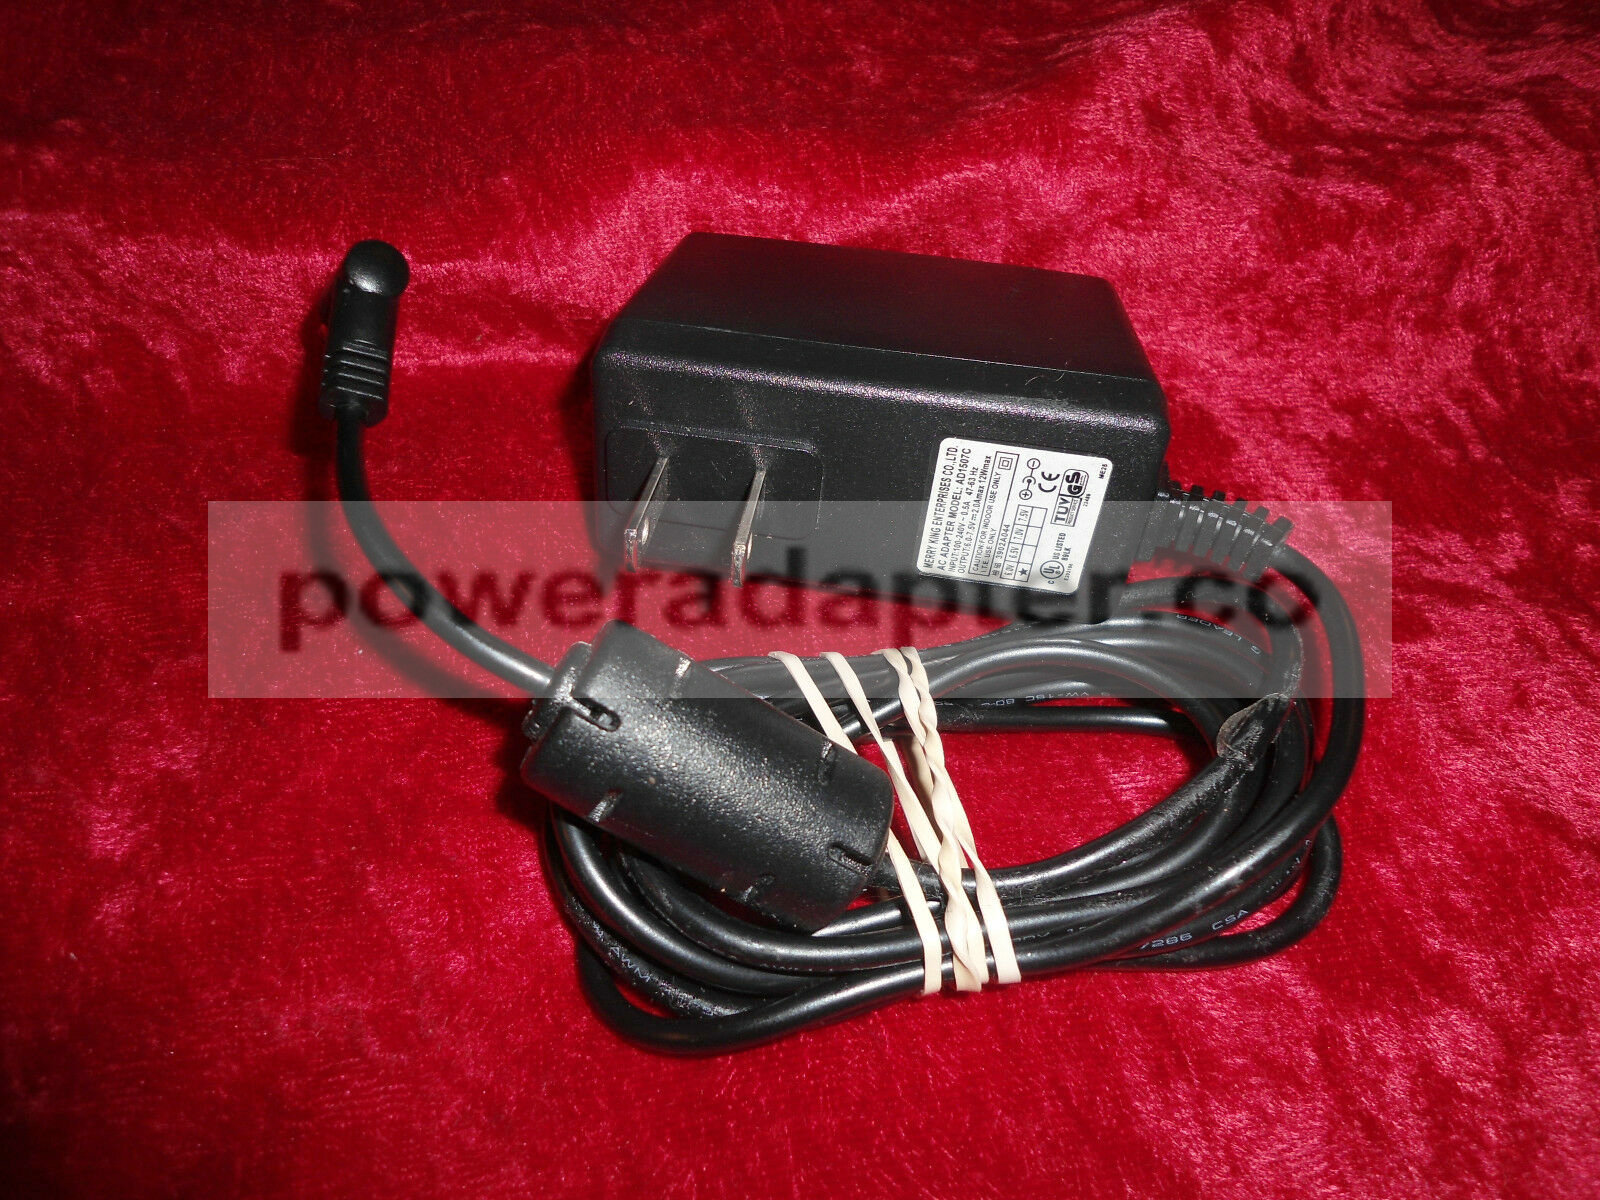 Merry King AD1507C AC Power Adapter 6-7.5 Volts 2A 12 Watts 220v Condition: Used: An item that has been used previou